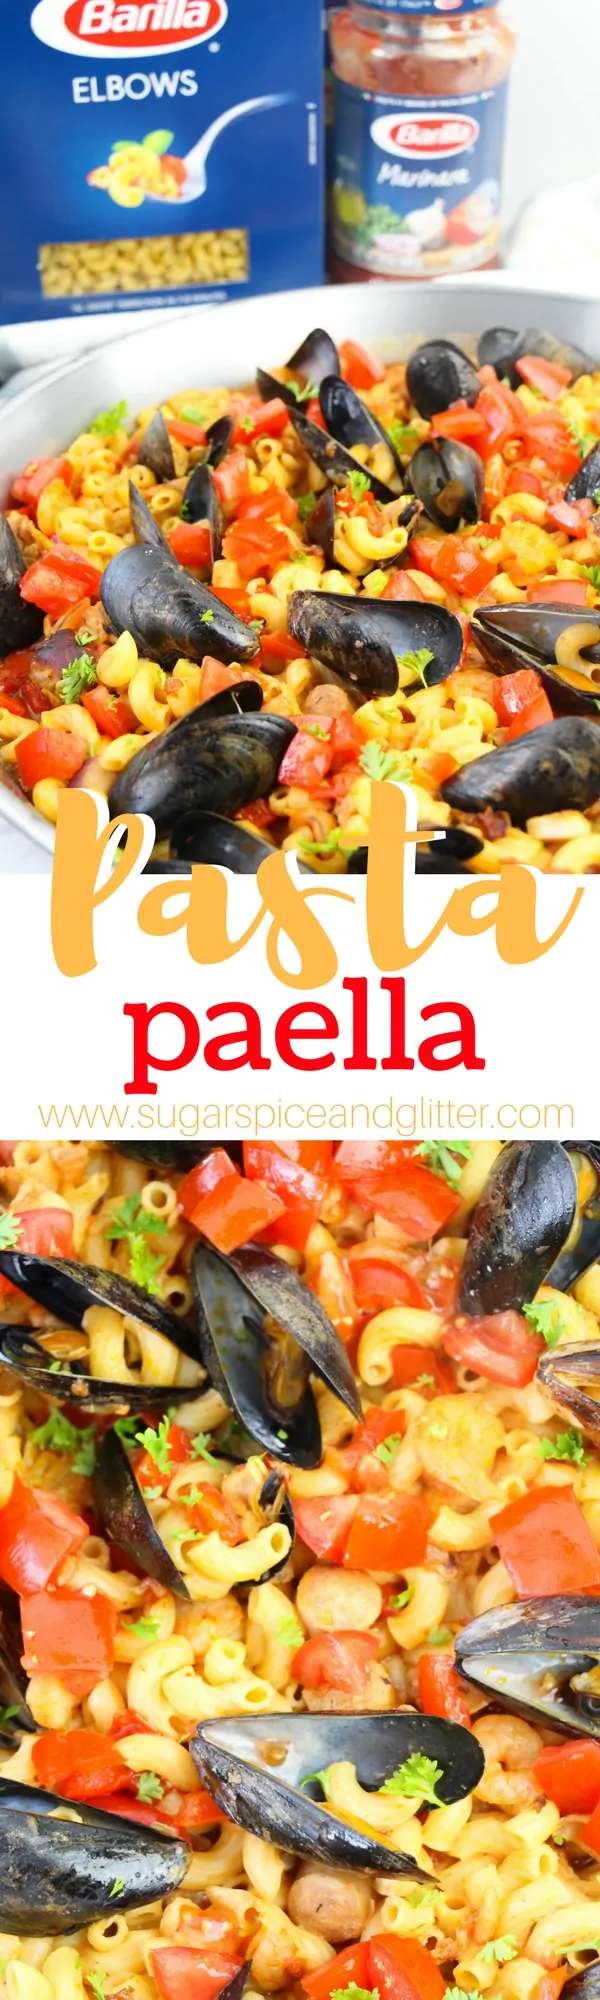 Pasta Paella, a delicious twist on a Classic Paella recipe using pasta to make it more kid-friendly (and quicker to make!) An awesome seafood recipe